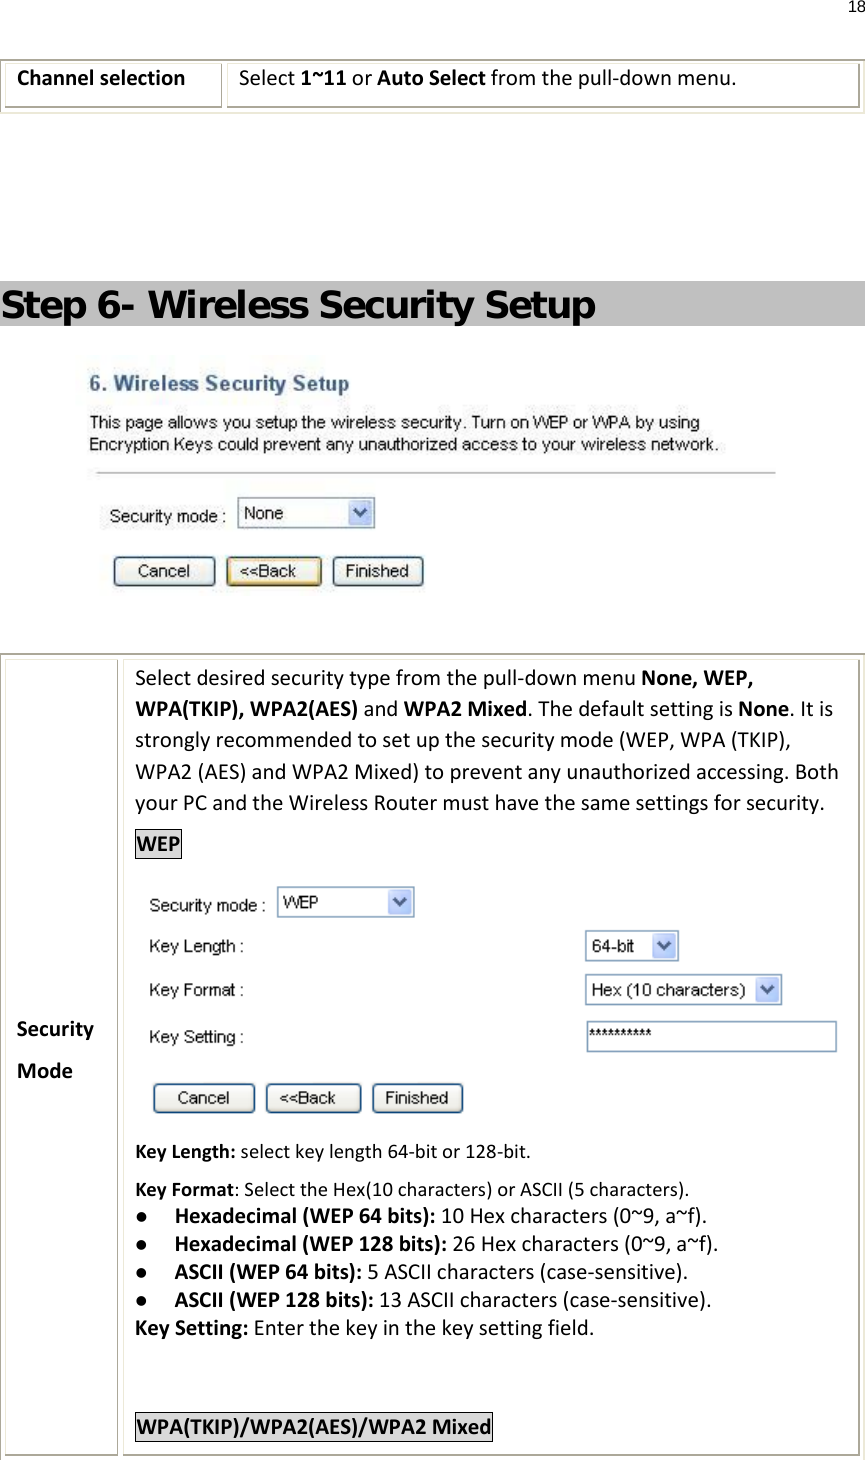 18  Channel selection Select 1~11 or Auto Select from the pull-down menu.    Step 6- Wireless Security Setup   Security Mode Select desired security type from the pull-down menu None, WEP, WPA(TKIP), WPA2(AES) and WPA2 Mixed. The default setting is None. It is strongly recommended to set up the security mode (WEP, WPA (TKIP), WPA2 (AES) and WPA2 Mixed) to prevent any unauthorized accessing. Both your PC and the Wireless Router must have the same settings for security. WEP  Key Length: select key length 64-bit or 128-bit. Key Format: Select the Hex(10 characters) or ASCII (5 characters).  Hexadecimal (WEP 64 bits): 10 Hex characters (0~9, a~f).   Hexadecimal (WEP 128 bits): 26 Hex characters (0~9, a~f).  ASCII (WEP 64 bits): 5 ASCII characters (case-sensitive).  ASCII (WEP 128 bits): 13 ASCII characters (case-sensitive). Key Setting: Enter the key in the key setting field.  WPA(TKIP)/WPA2(AES)/WPA2 Mixed  